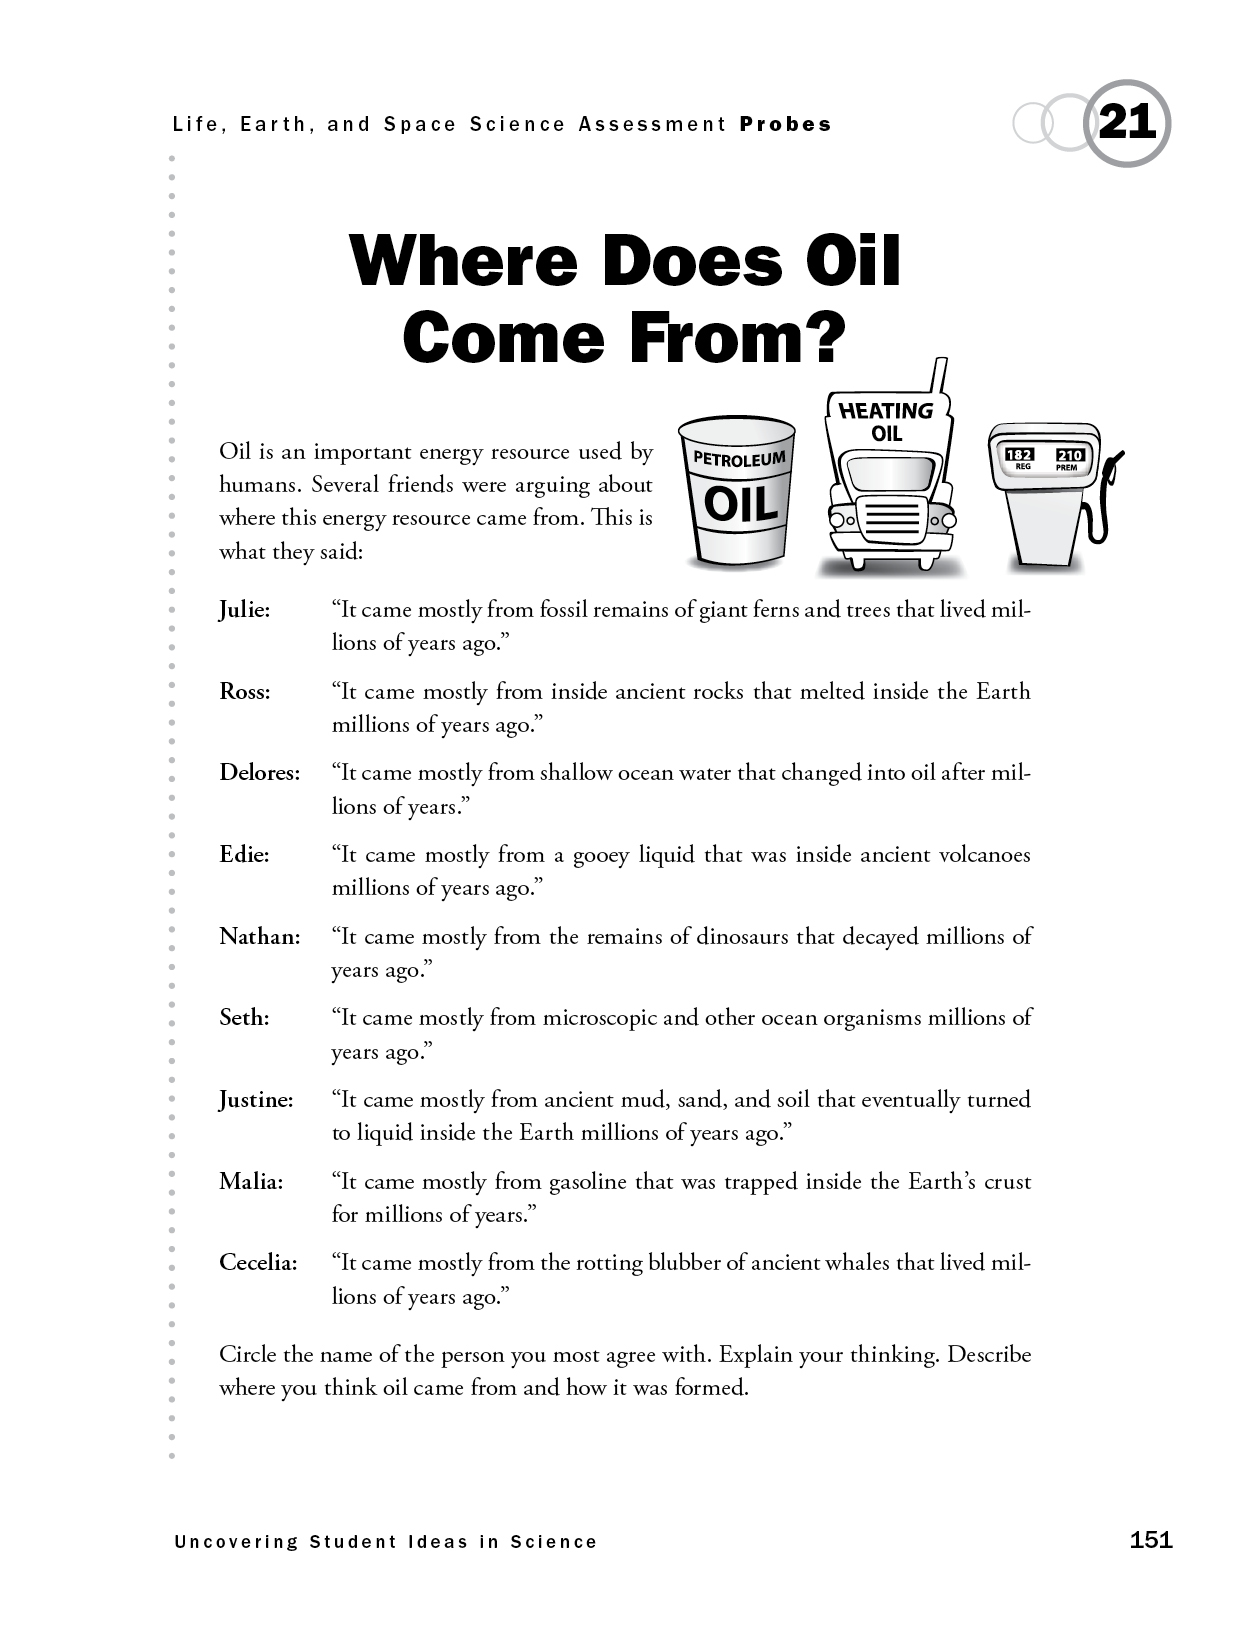 Where Does Oil Come From?